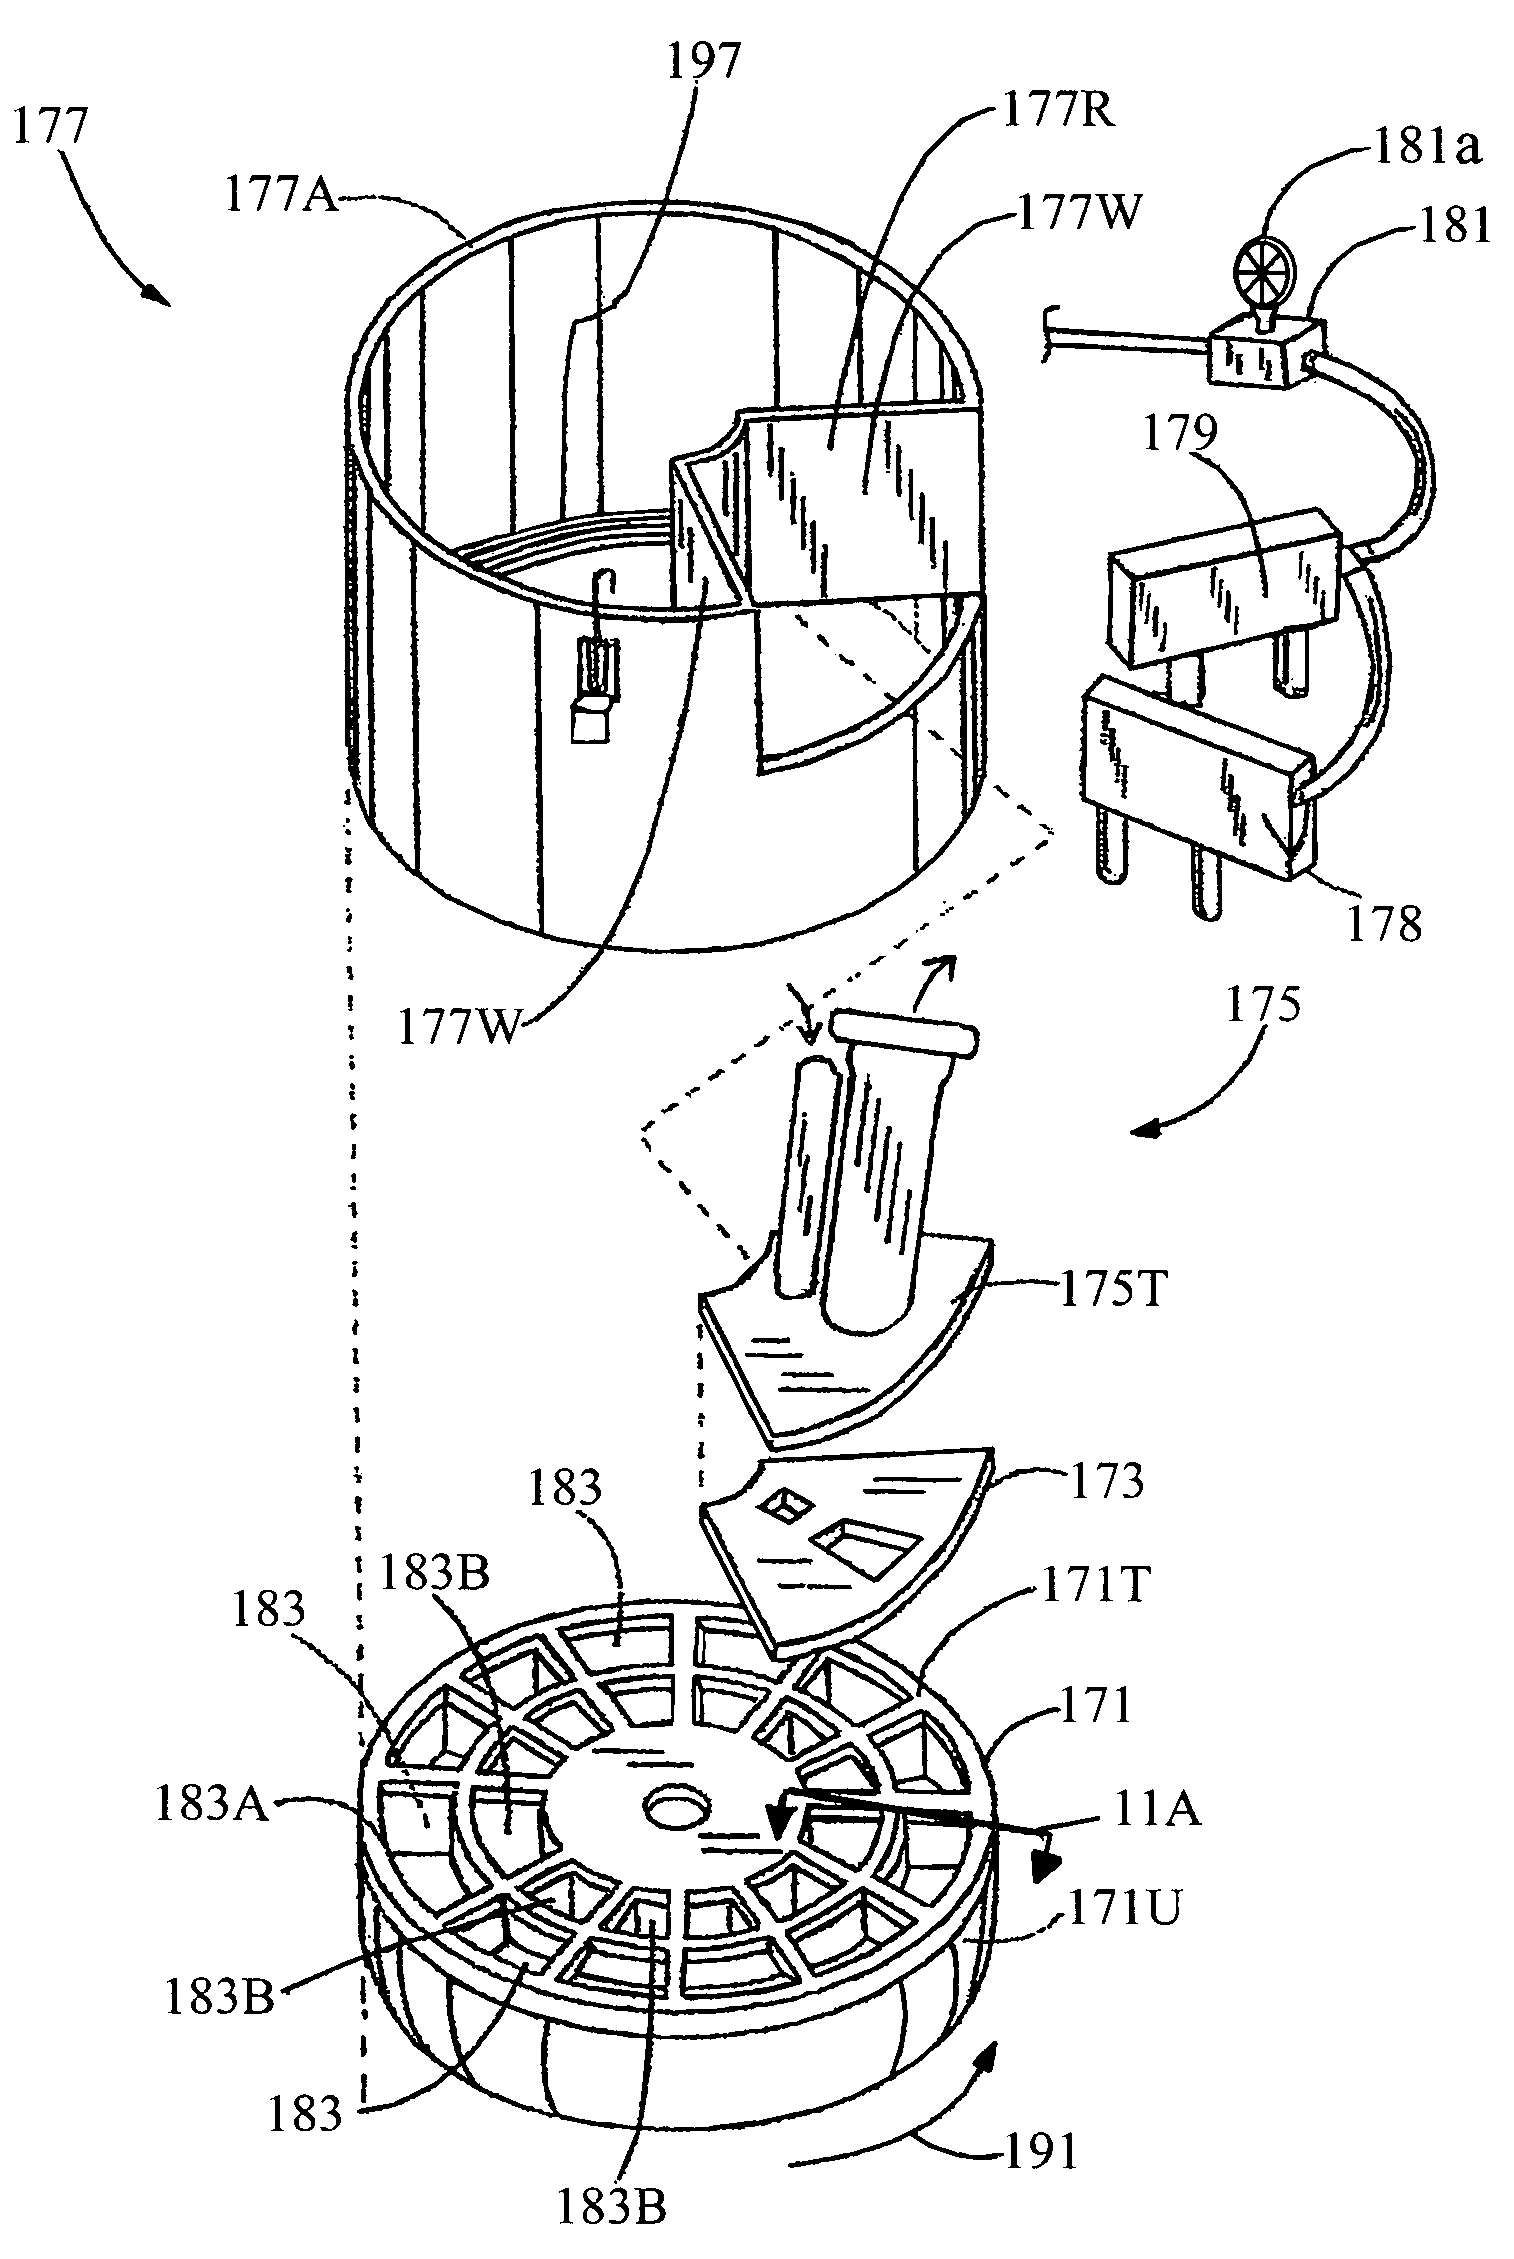 Apparatus and method for moving and placing granulate material